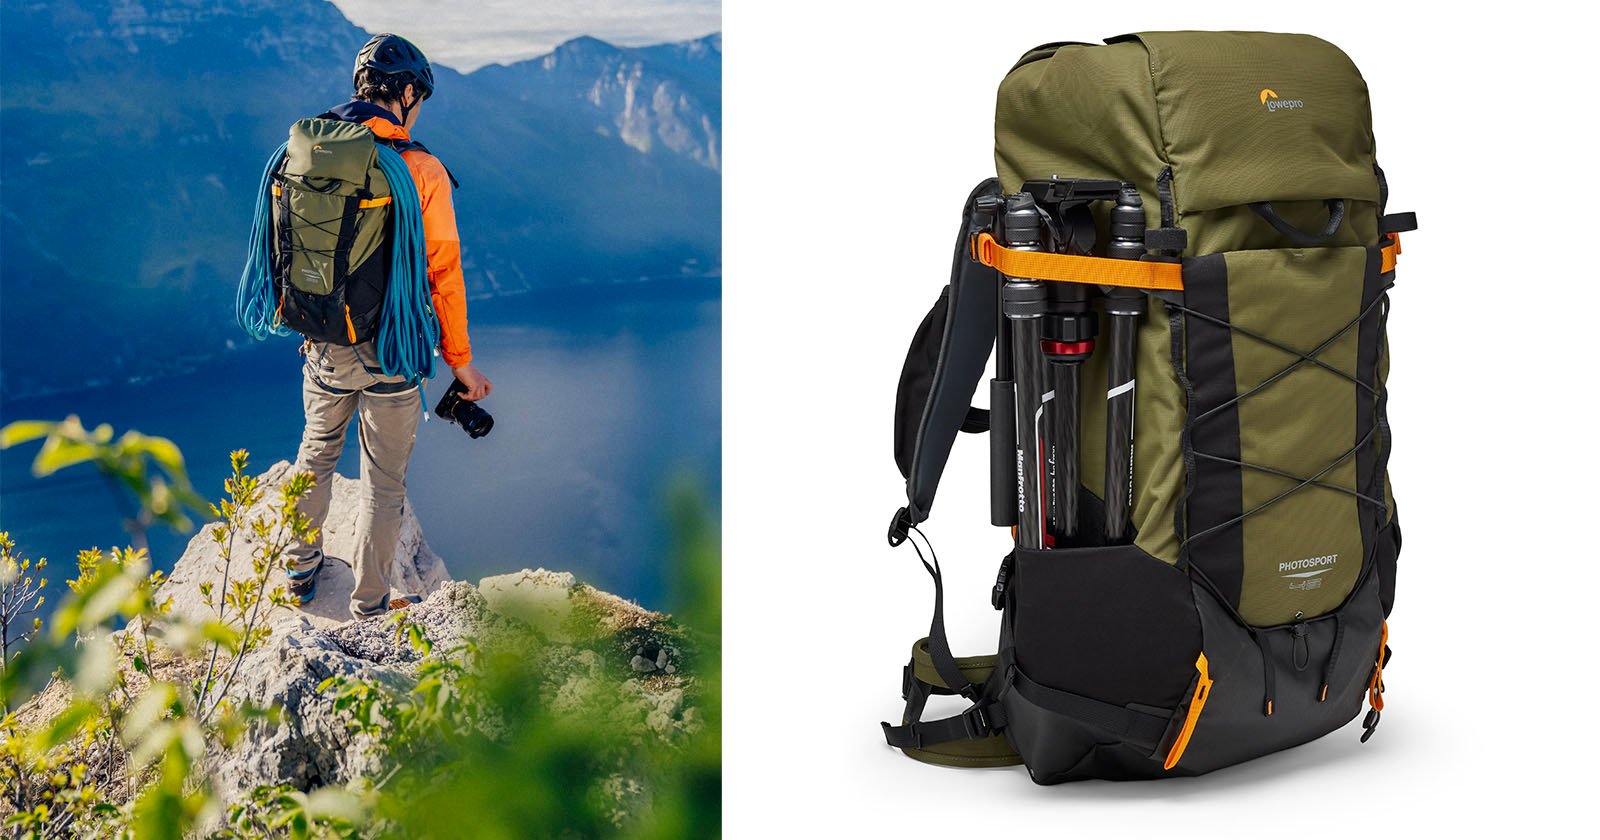 Lowepros New PhotoSport X is a Backpack Designed for Adventure